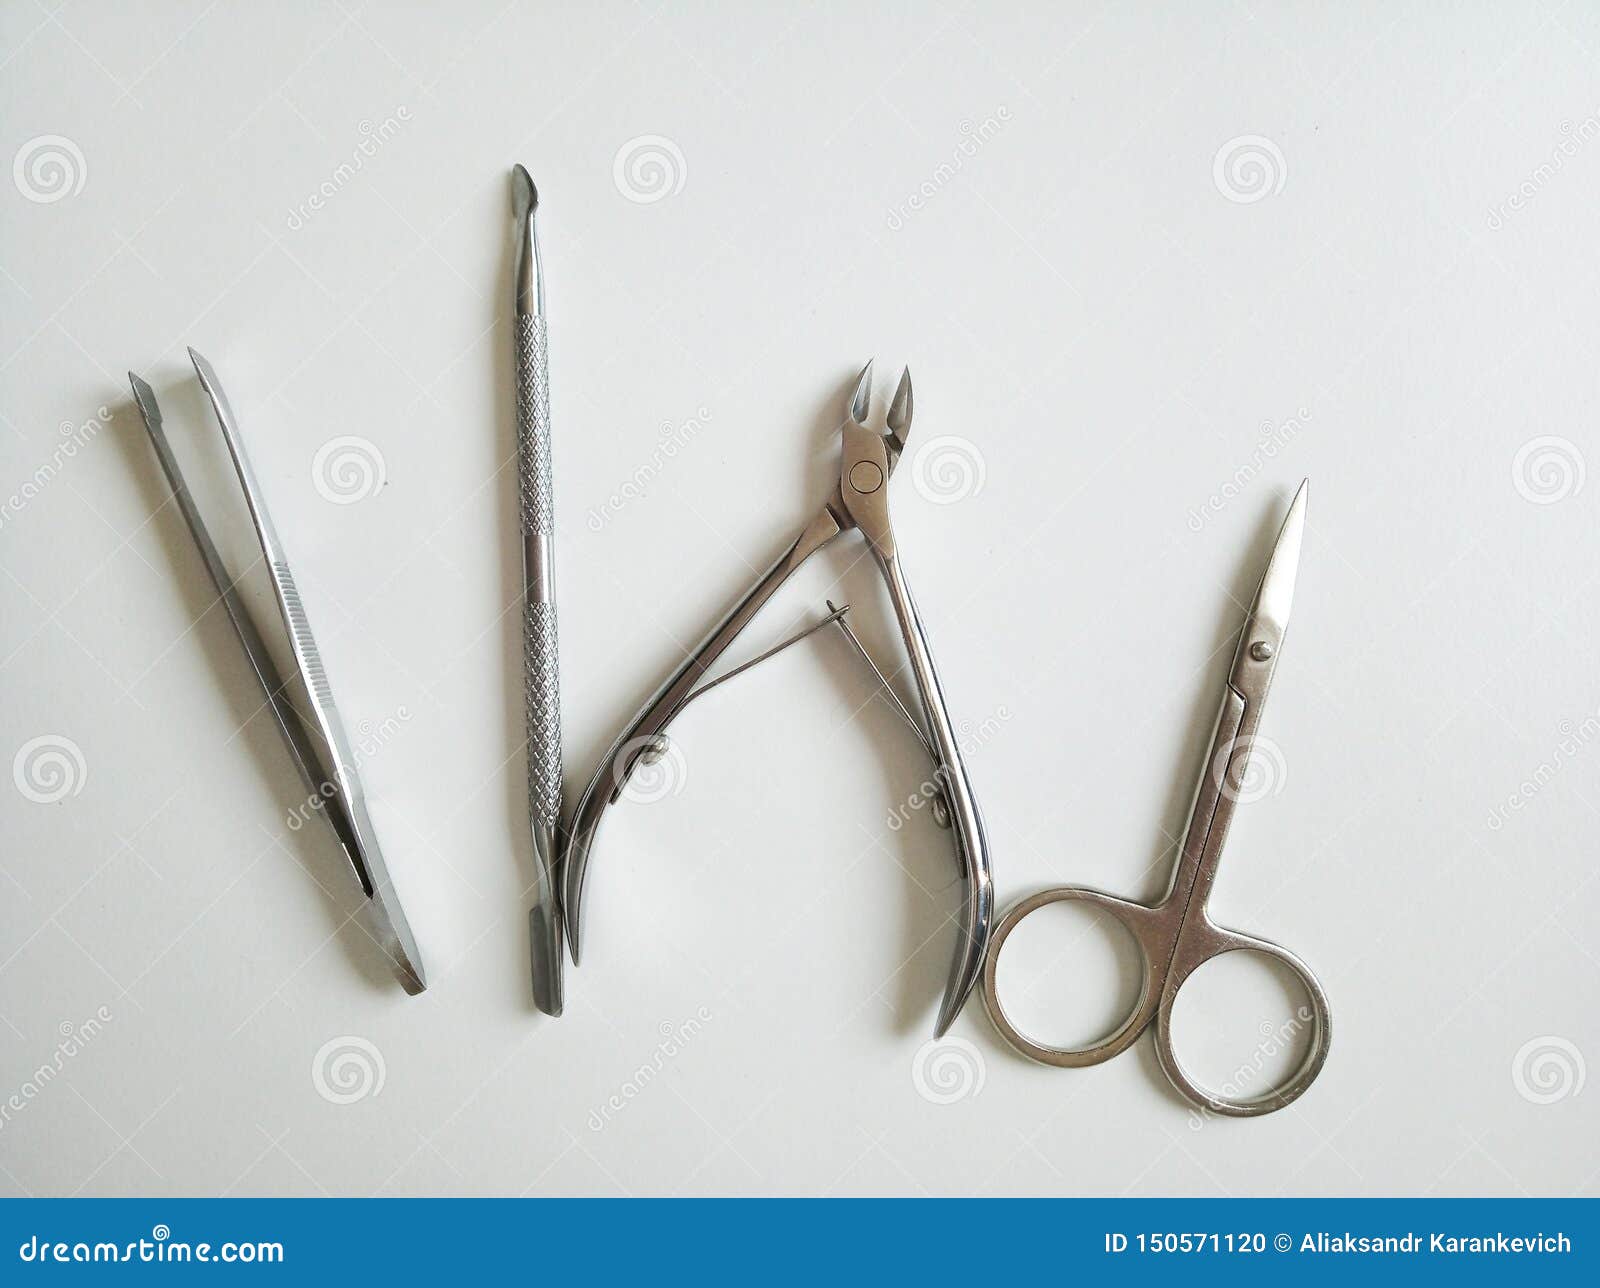 top view of manicure tools set for nail care over light background - brush,  scissors, nail polish, file and tweezers Stock Photo - Alamy